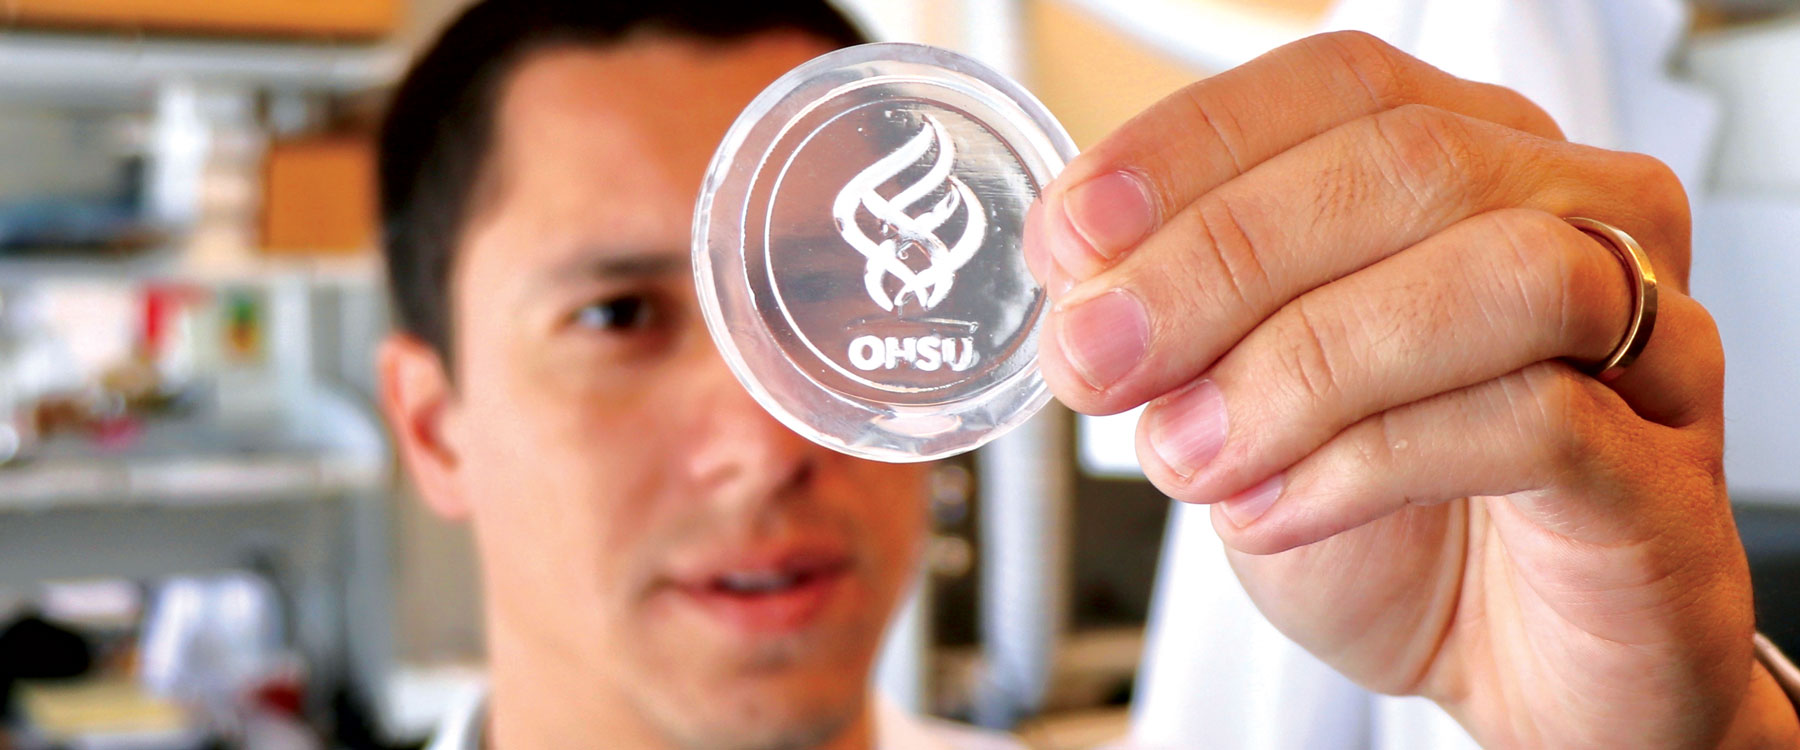 Researcher holds up a dish showing the OHSU logo grown from engineered bone tissue